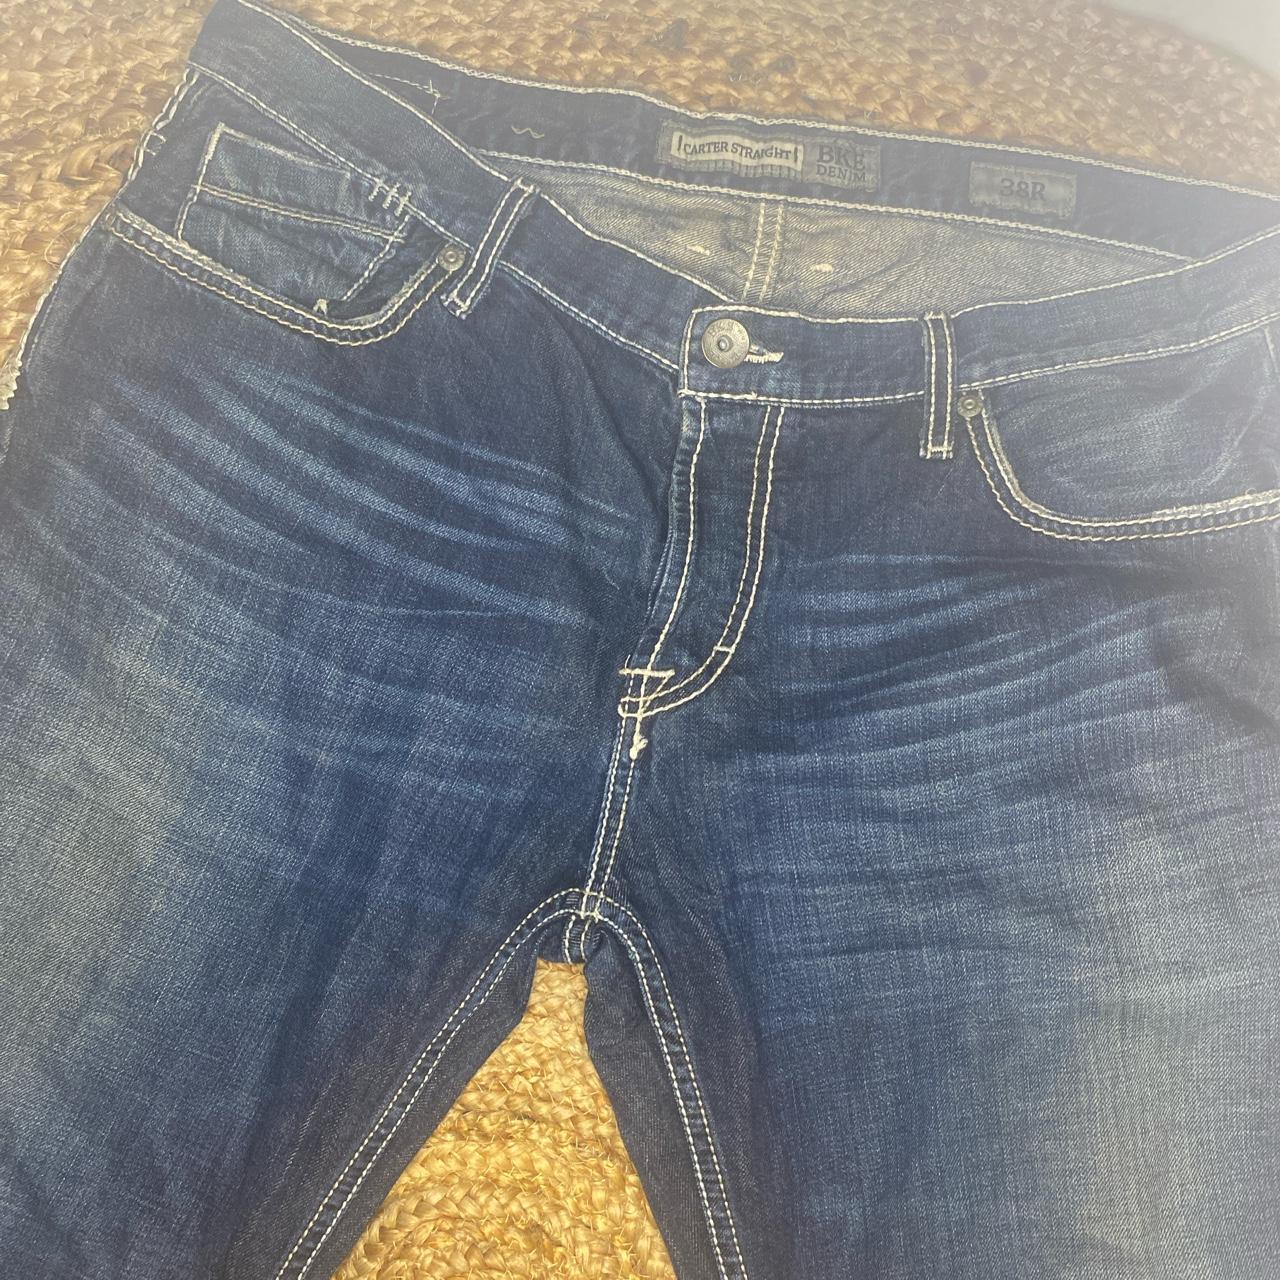 blue men’s bke jeans with white stitching - Depop